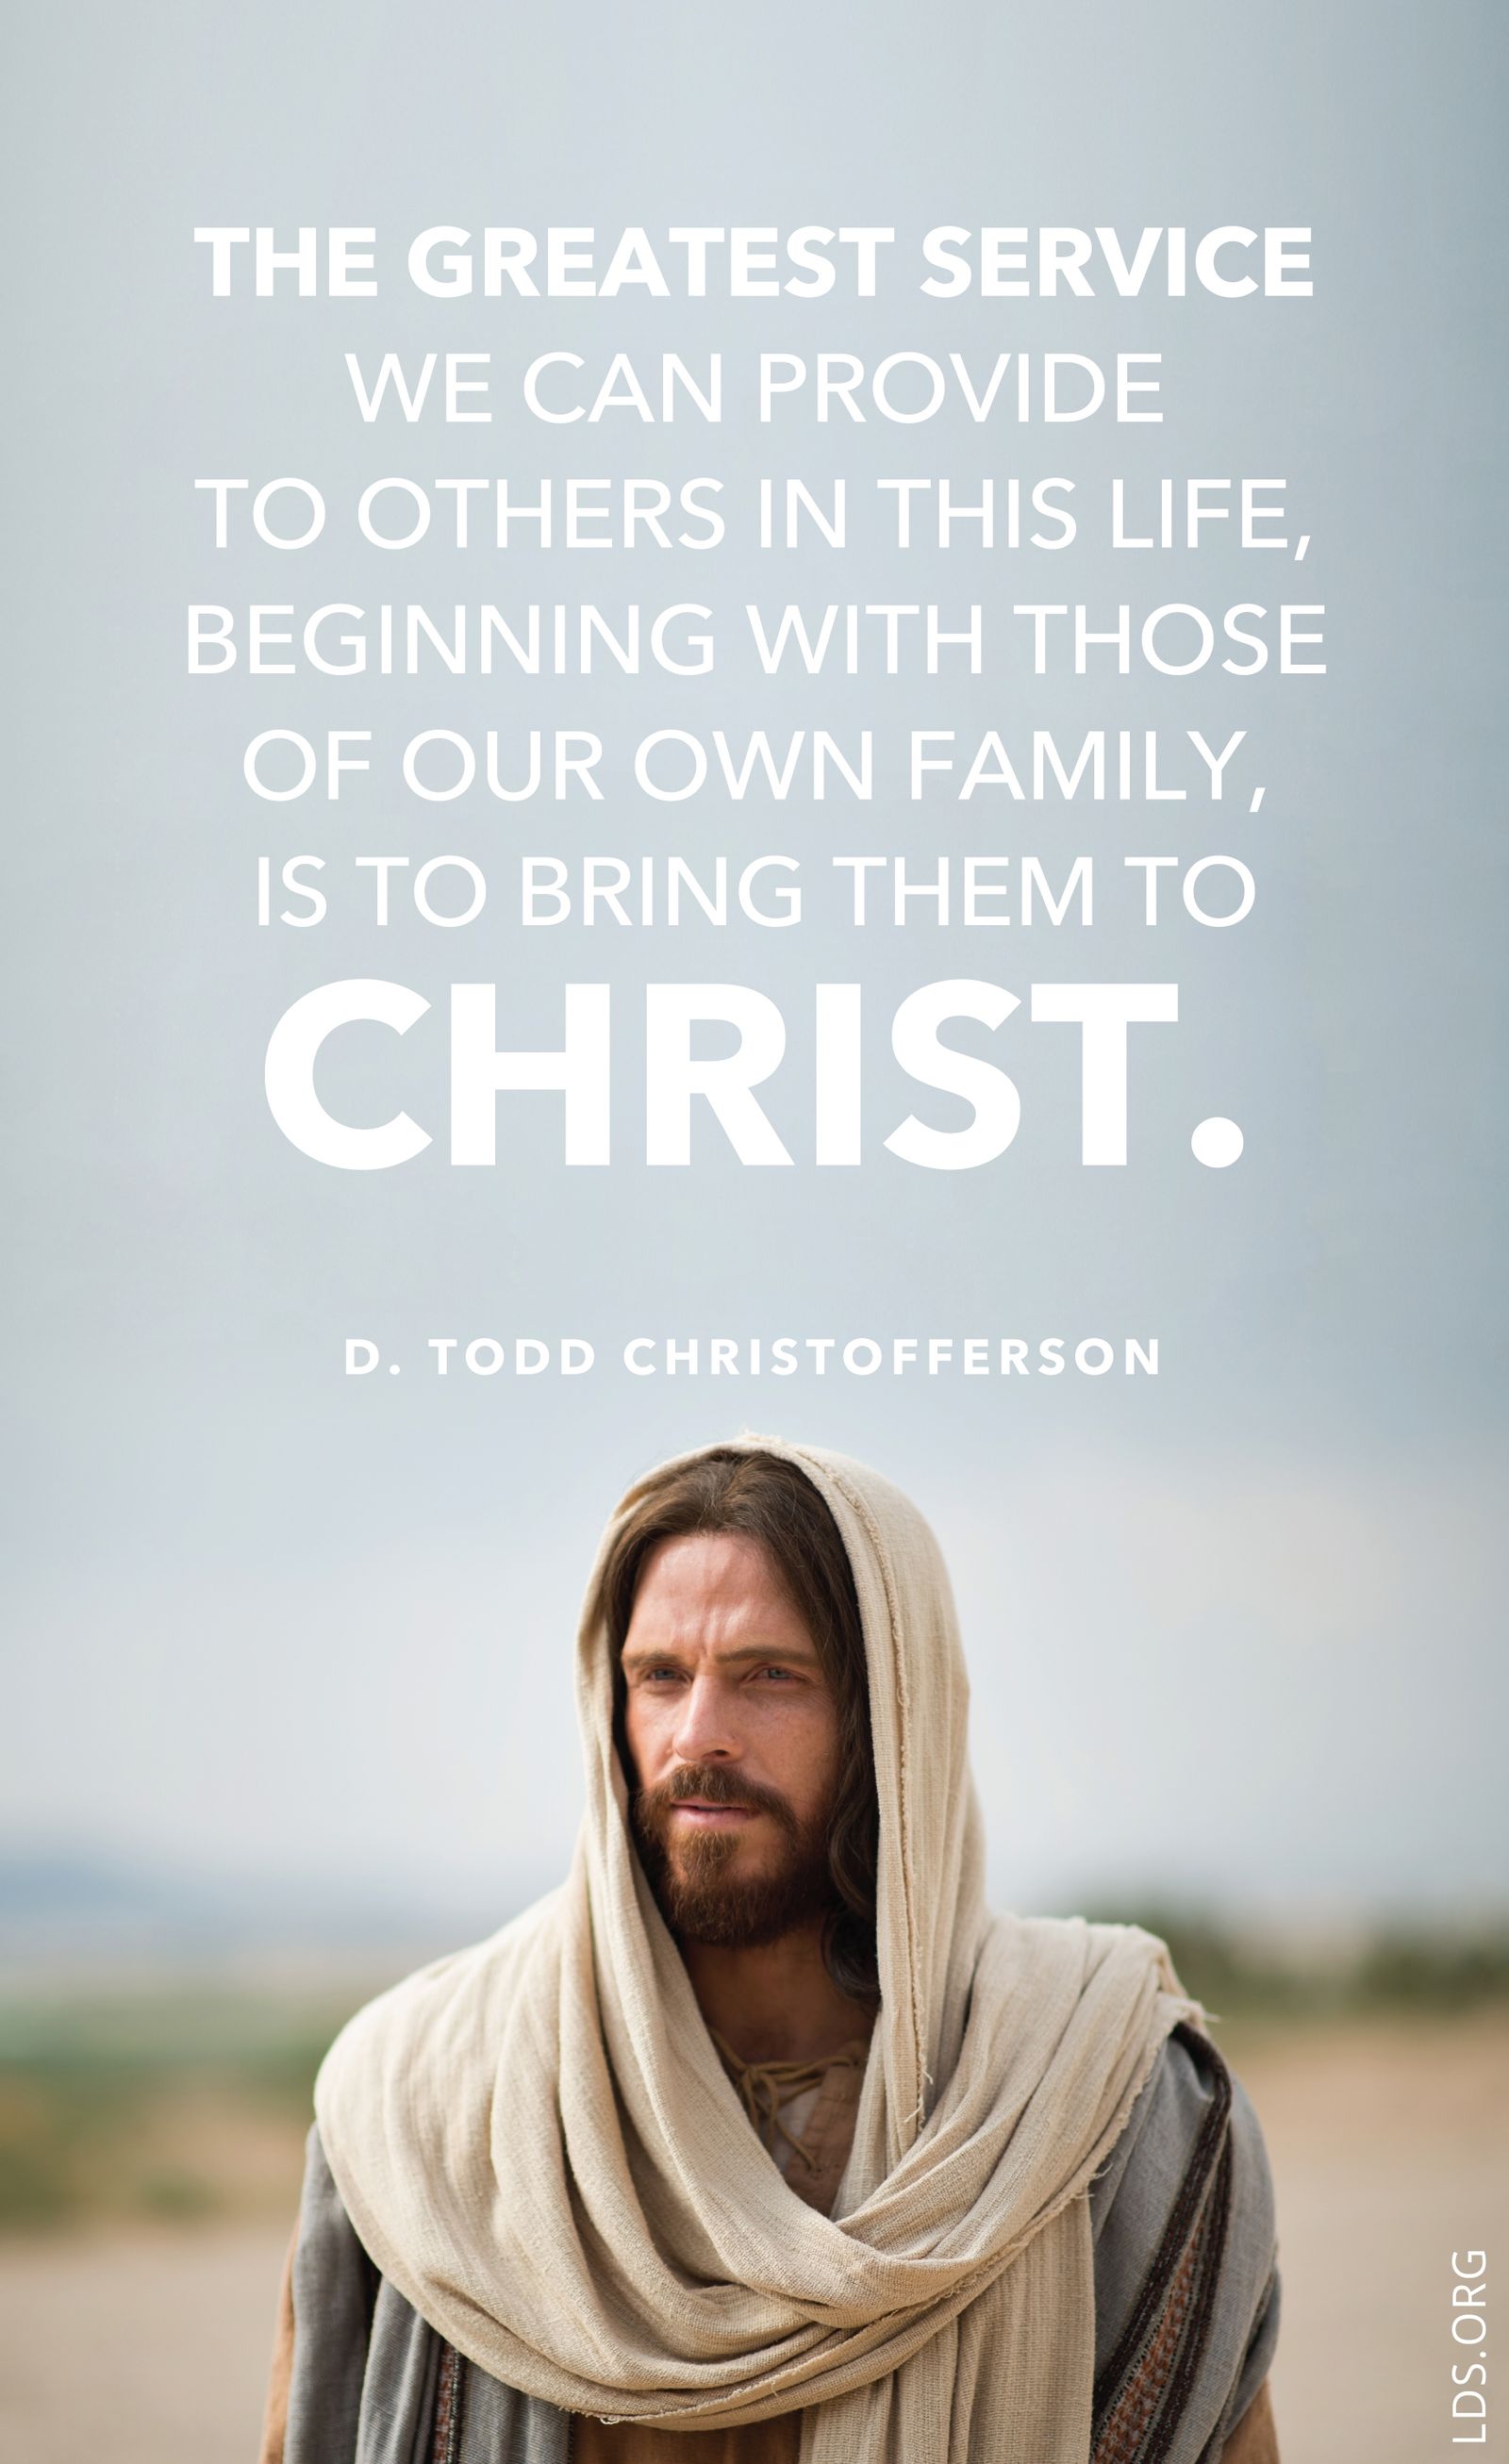 “The greatest service we can provide to others in this life, beginning with those of our own family, is to bring them to Christ.”—Elder D. Todd Christofferson, “Redemption” © See Individual Images ipCode 1.